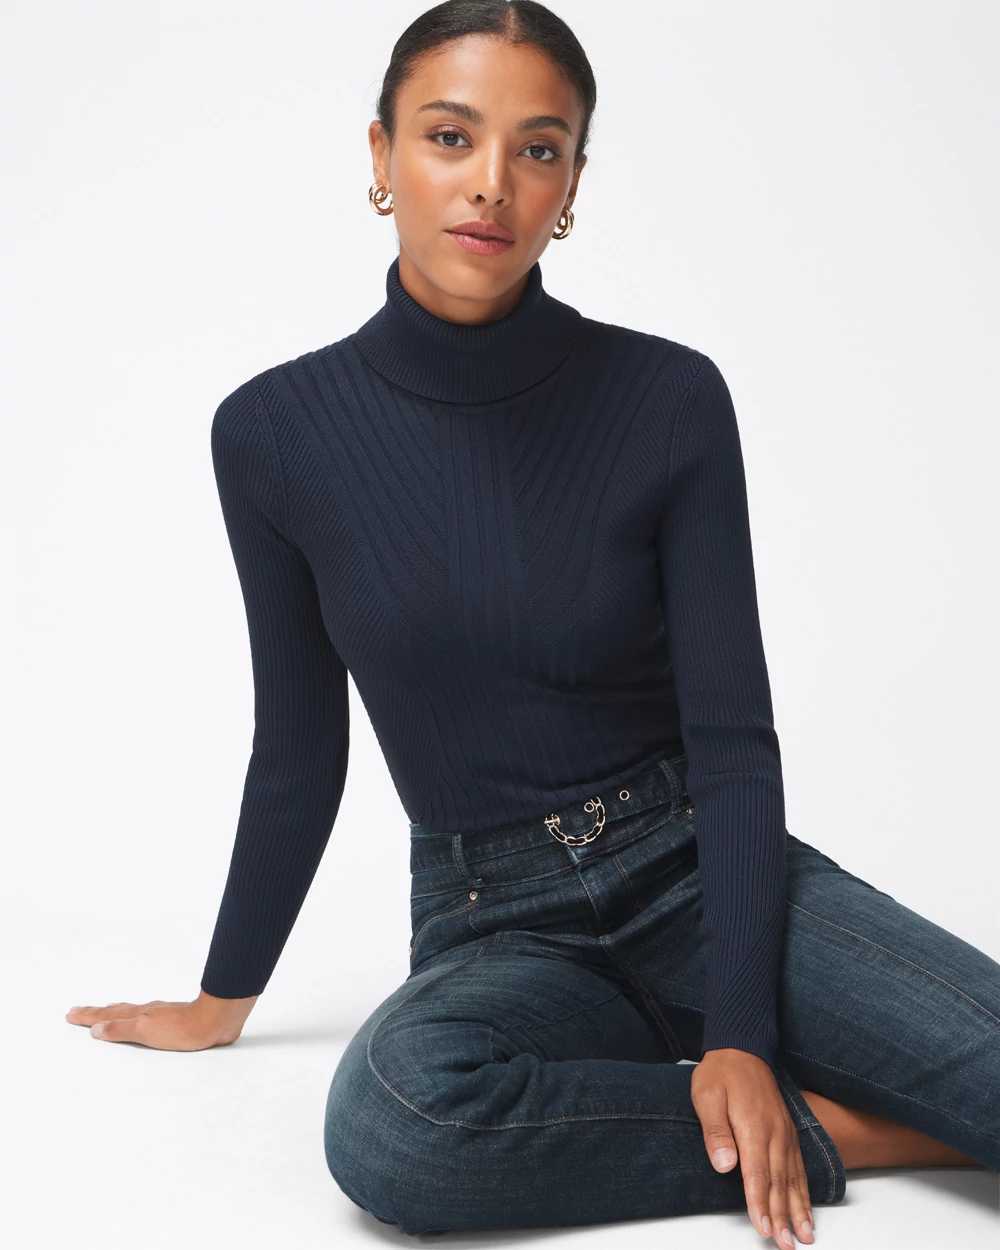 Long-Sleeve Ribbed Turtleneck click to view larger image.